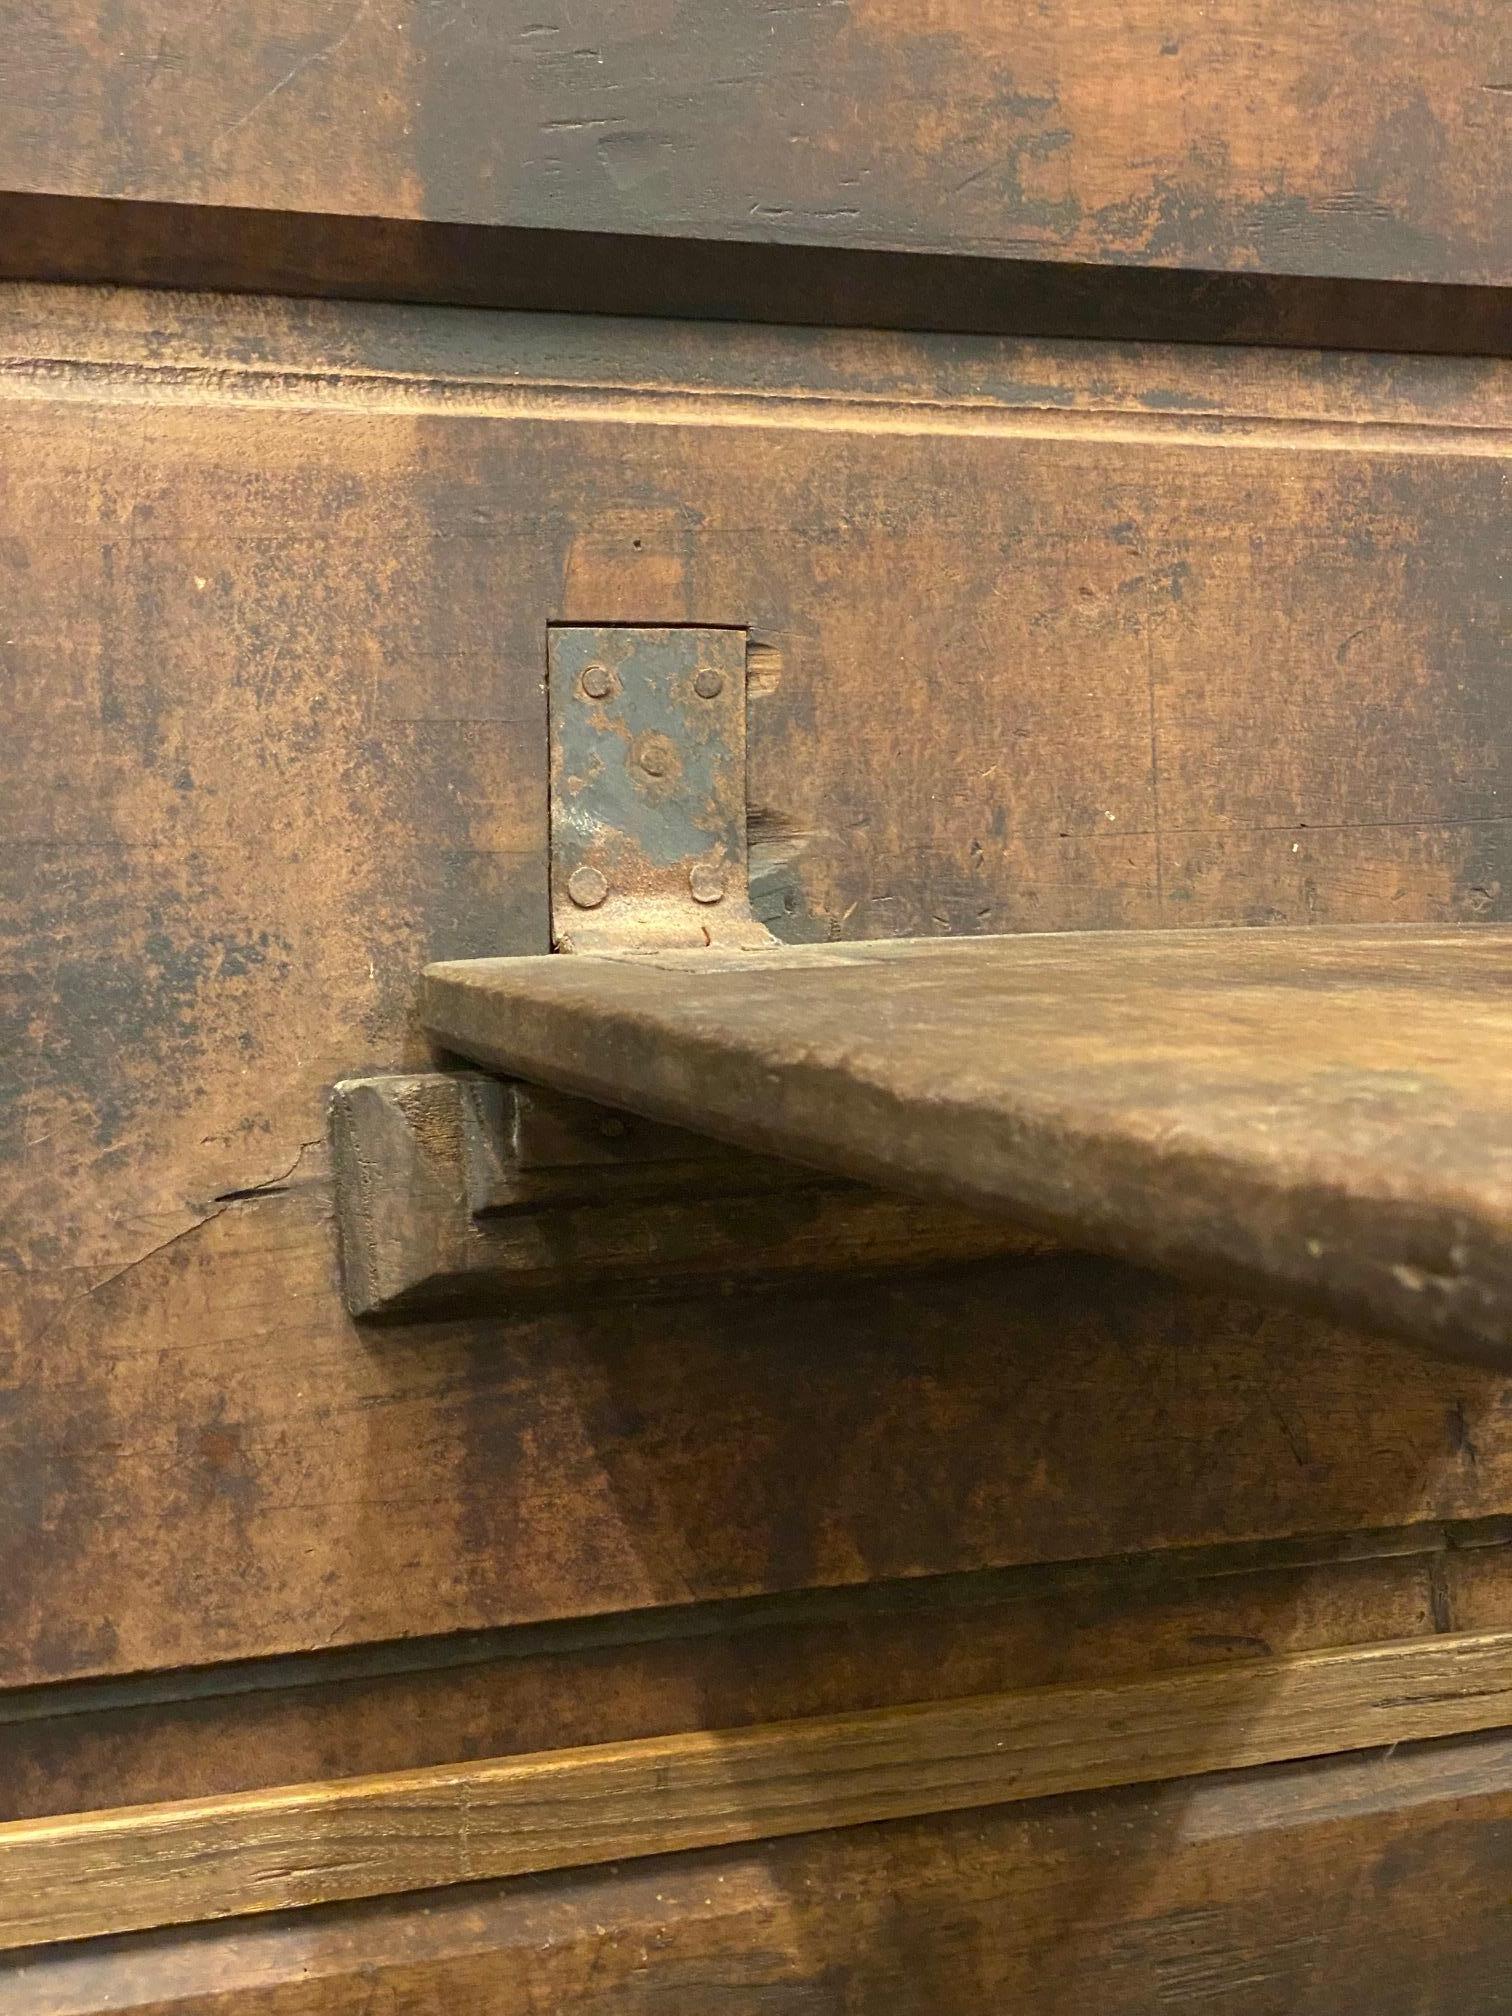 Solid oak settle with integrated drop down table.  Hand carved detailing throughout with forged iron hinges and hardware.  Solid and sturdy construction with subtle joinery techniques gives this functional period piece lots of character and appeal. 